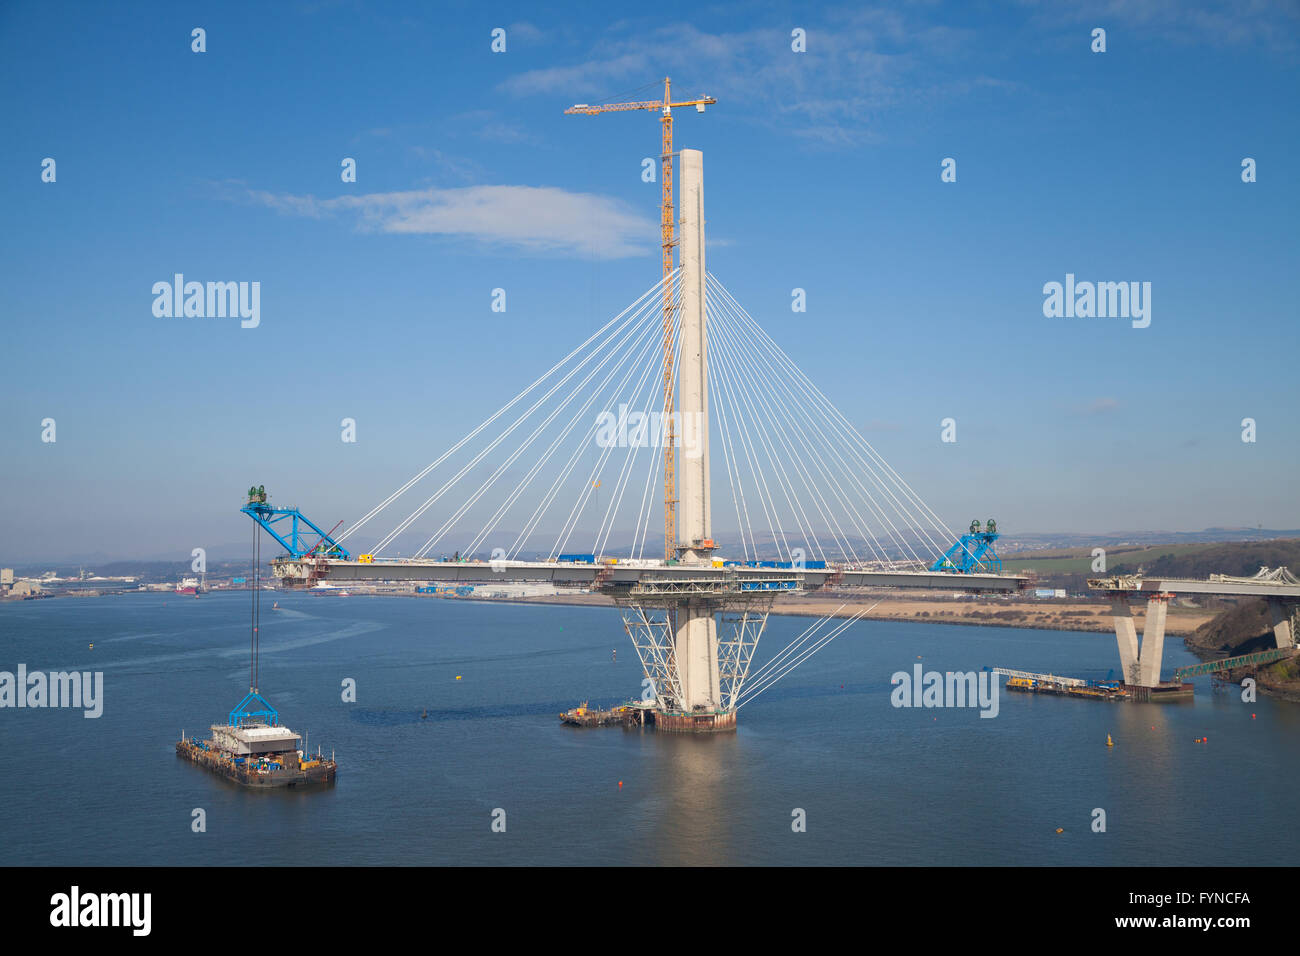 Construction of the new Queensferry Bridge over the Firth of Forth between Fife and West Lothian, Scotland. Stock Photo